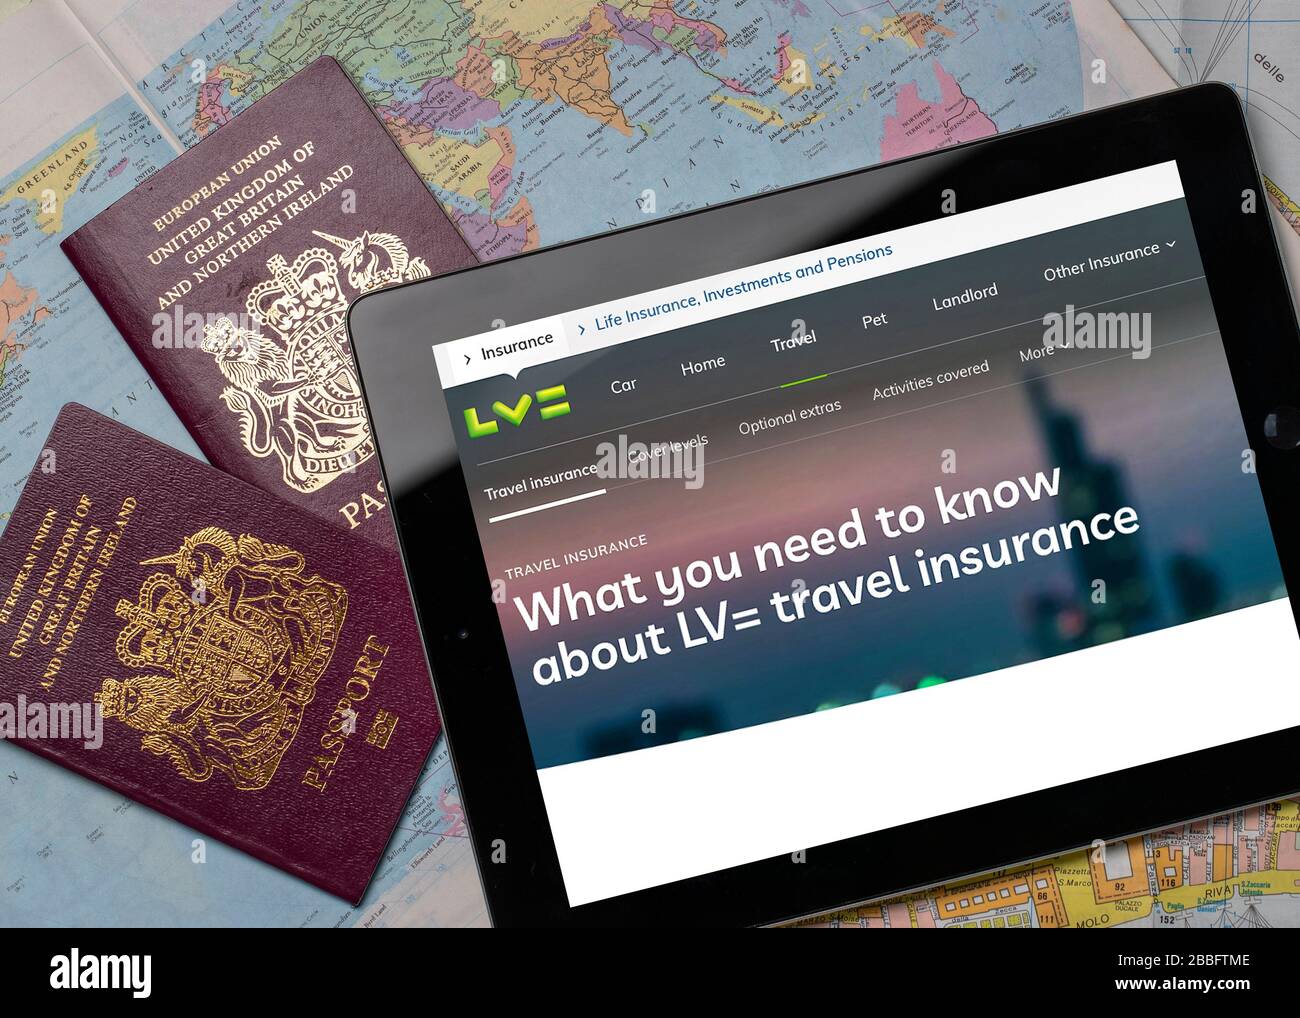 Liverpool Victoria LV Travel insurance website on an iPad or tablet. (editorial use only) Stock Photo